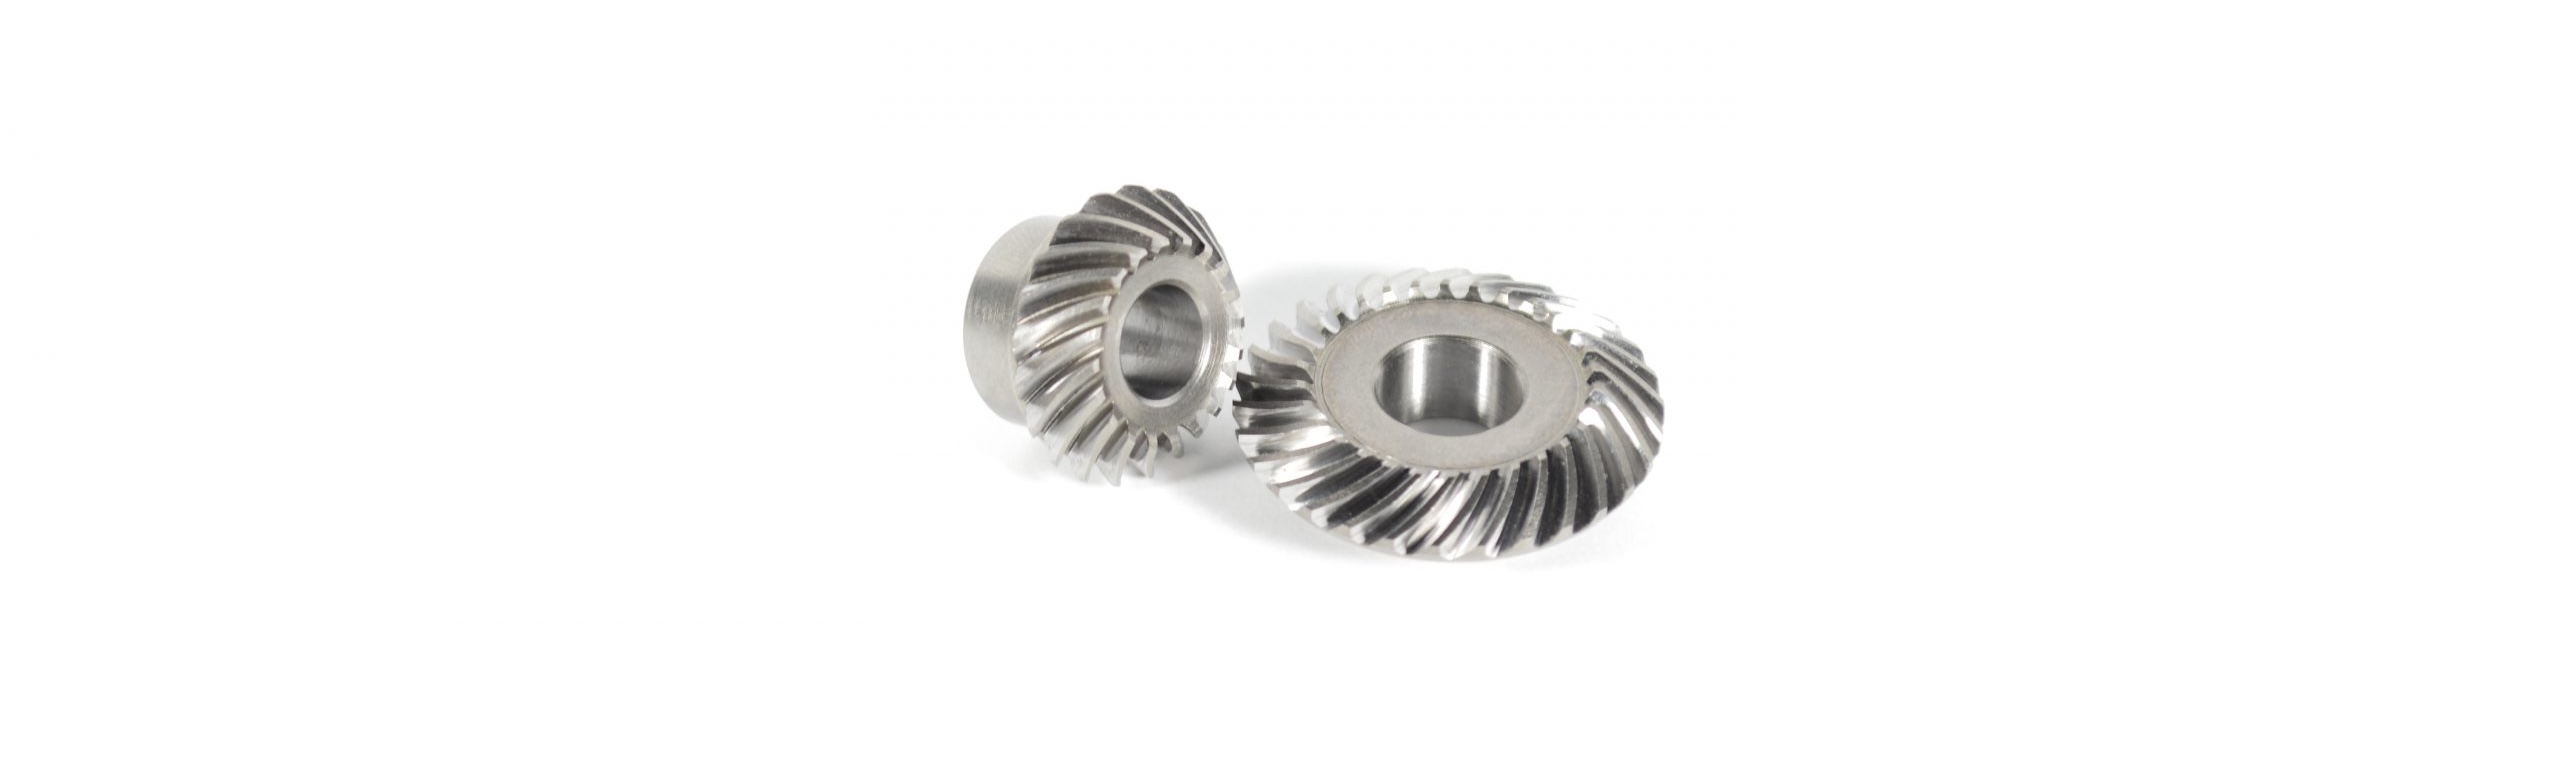 Small Bevel & Miter Gear Manufacturing